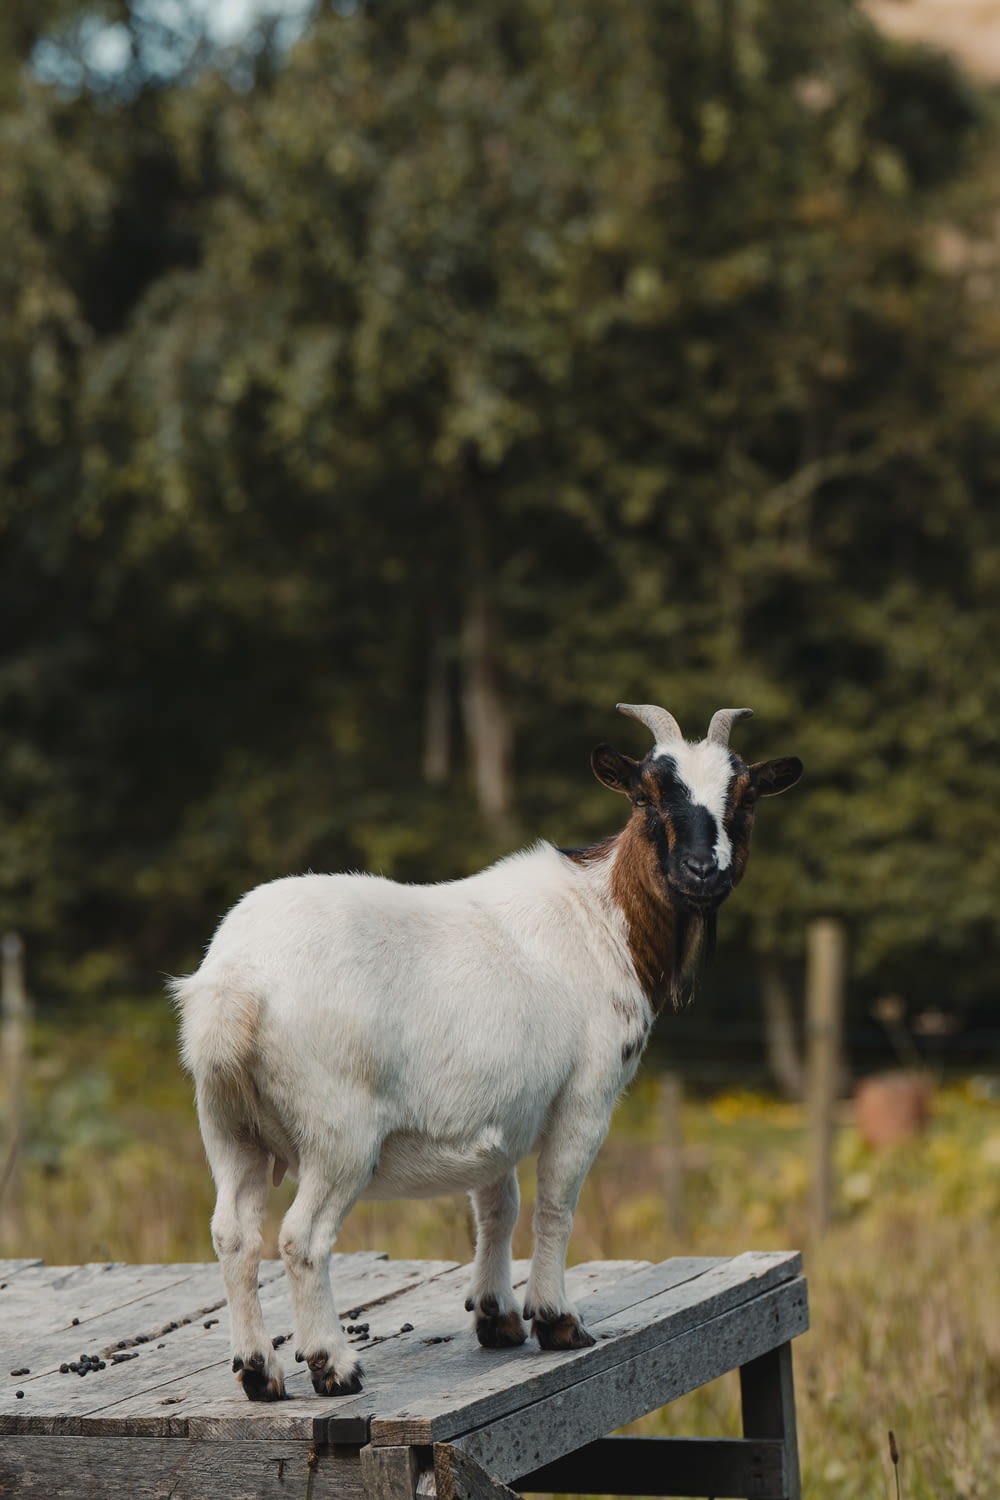 a goat standing on top of a wooden platform